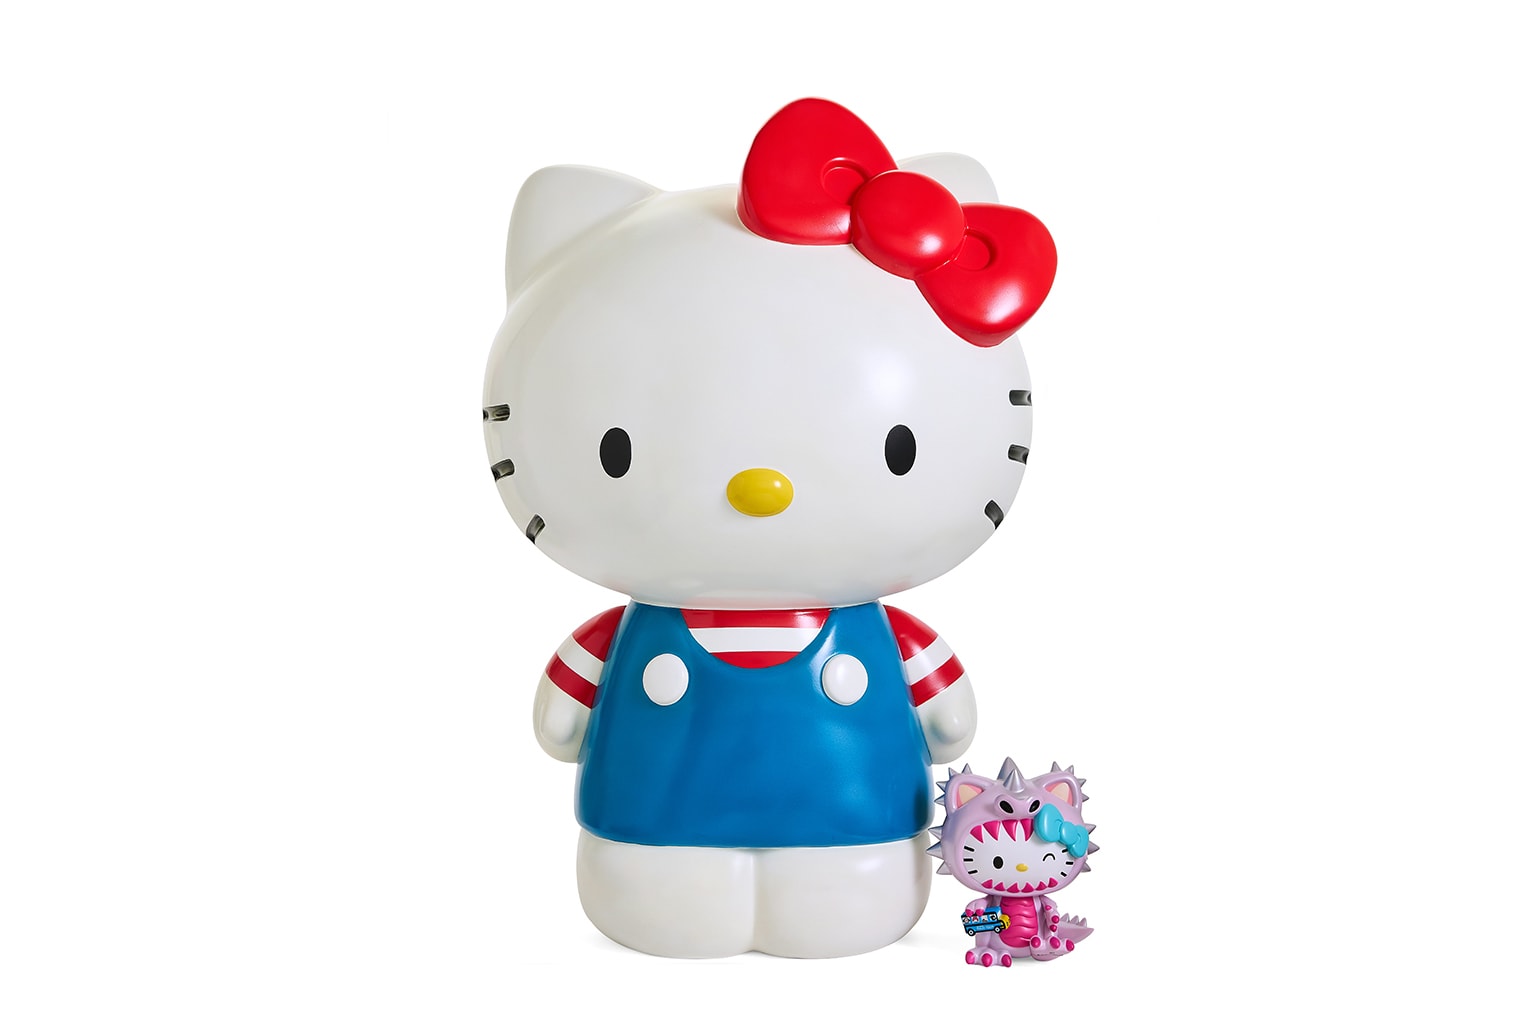 The Fourth Musketeer: More on Hello Kitty Con